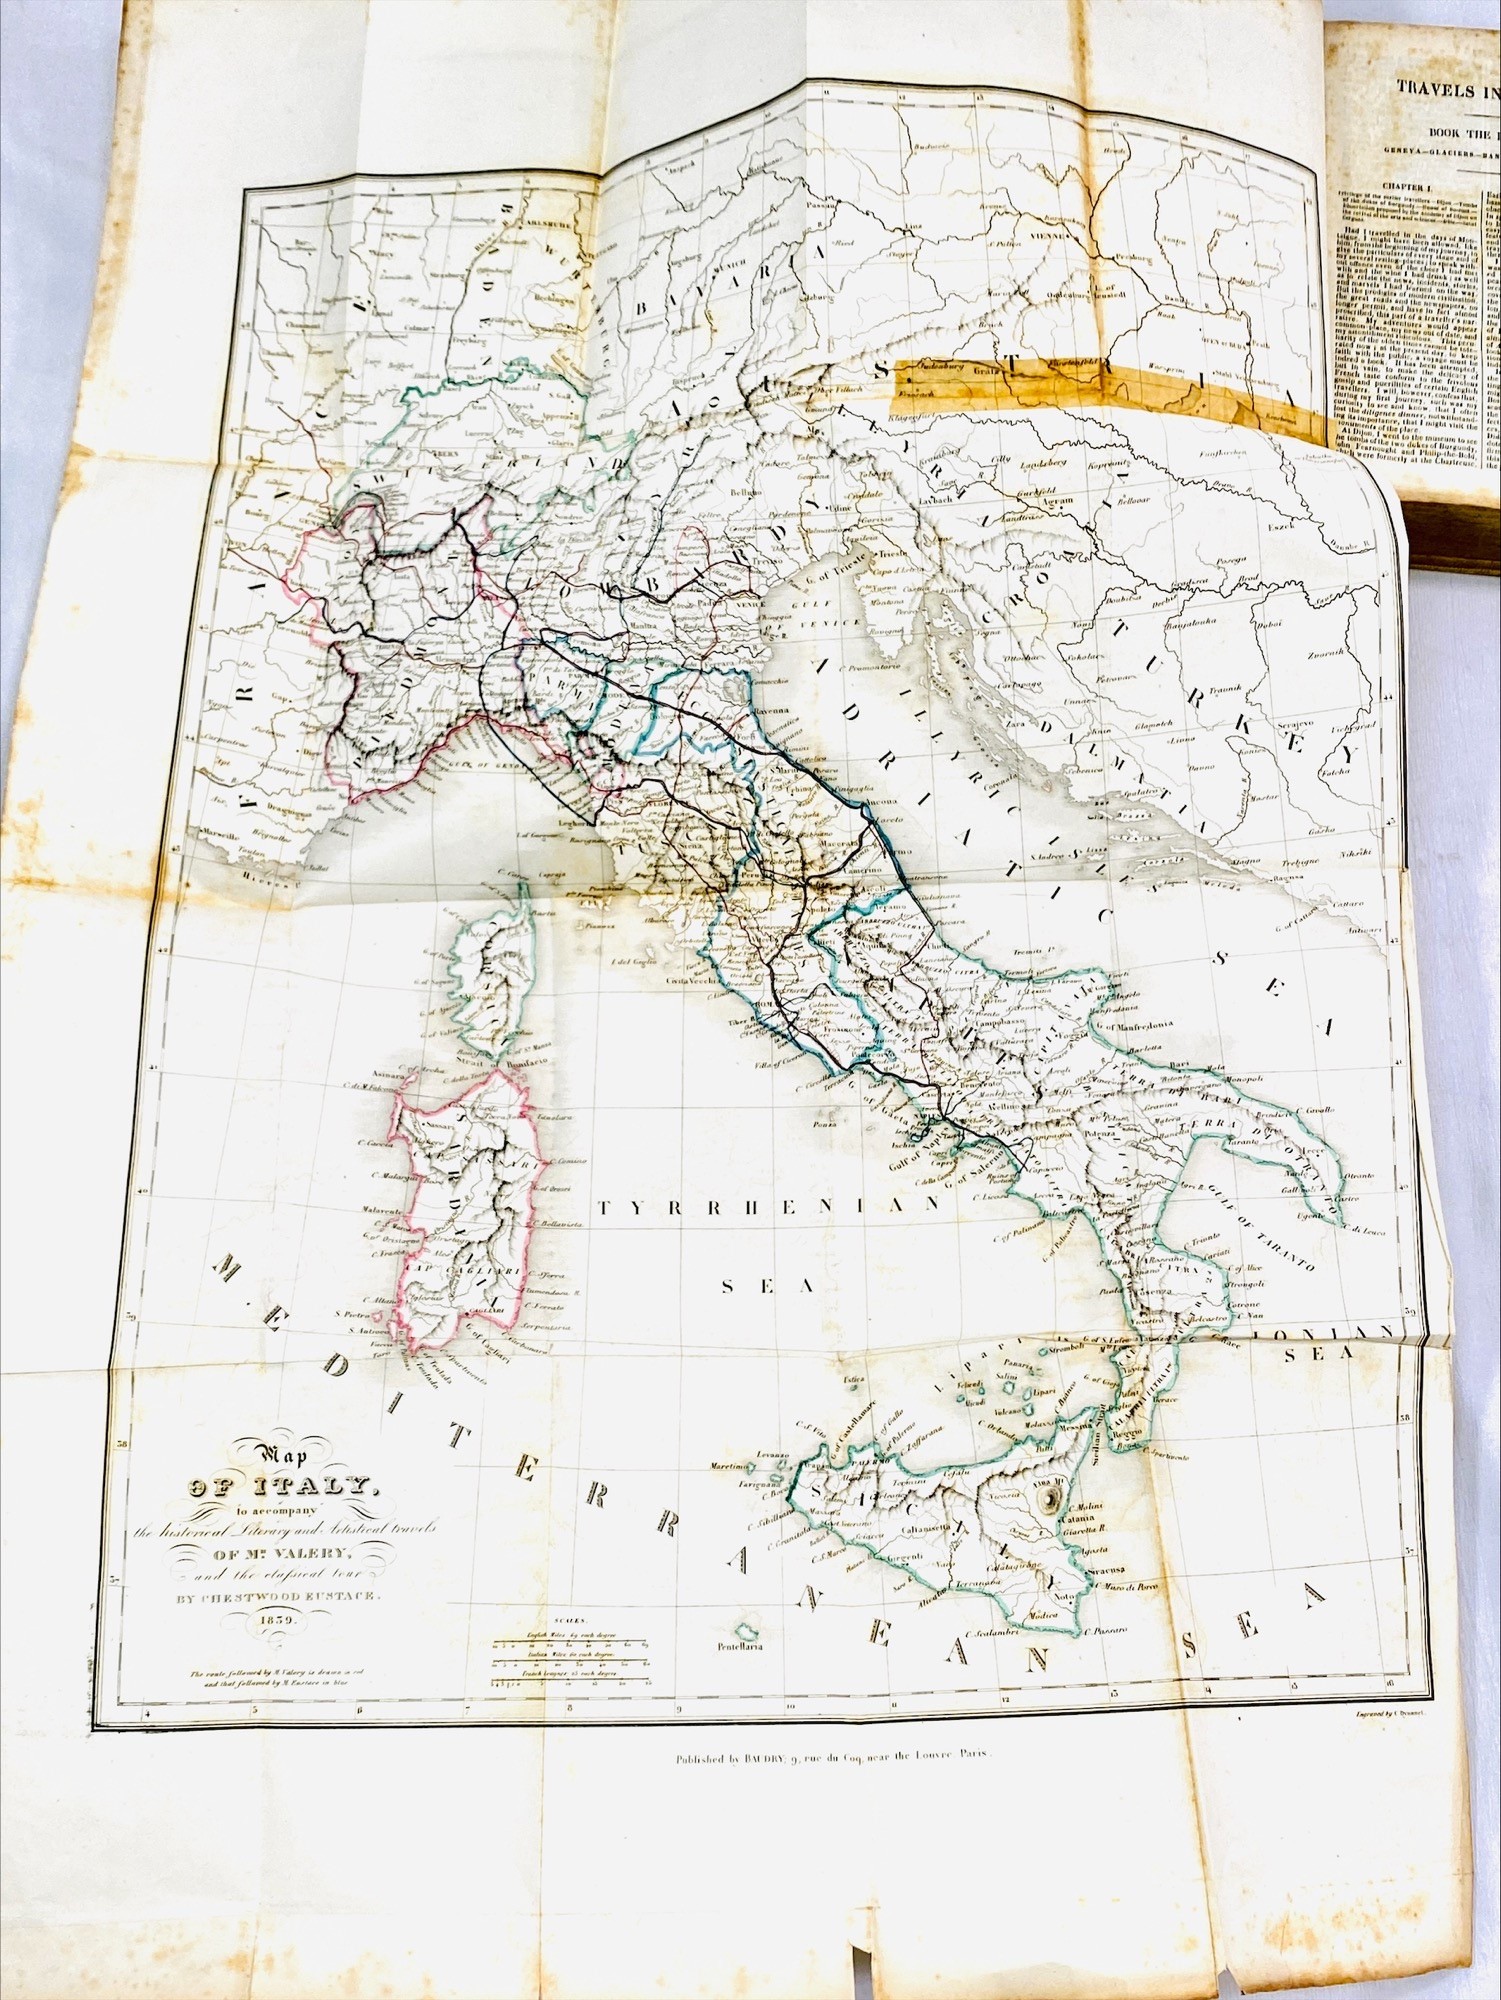 Valery’s Italy Historical literary and artistical travels in Italy Guide for travellers and artists - Image 4 of 5